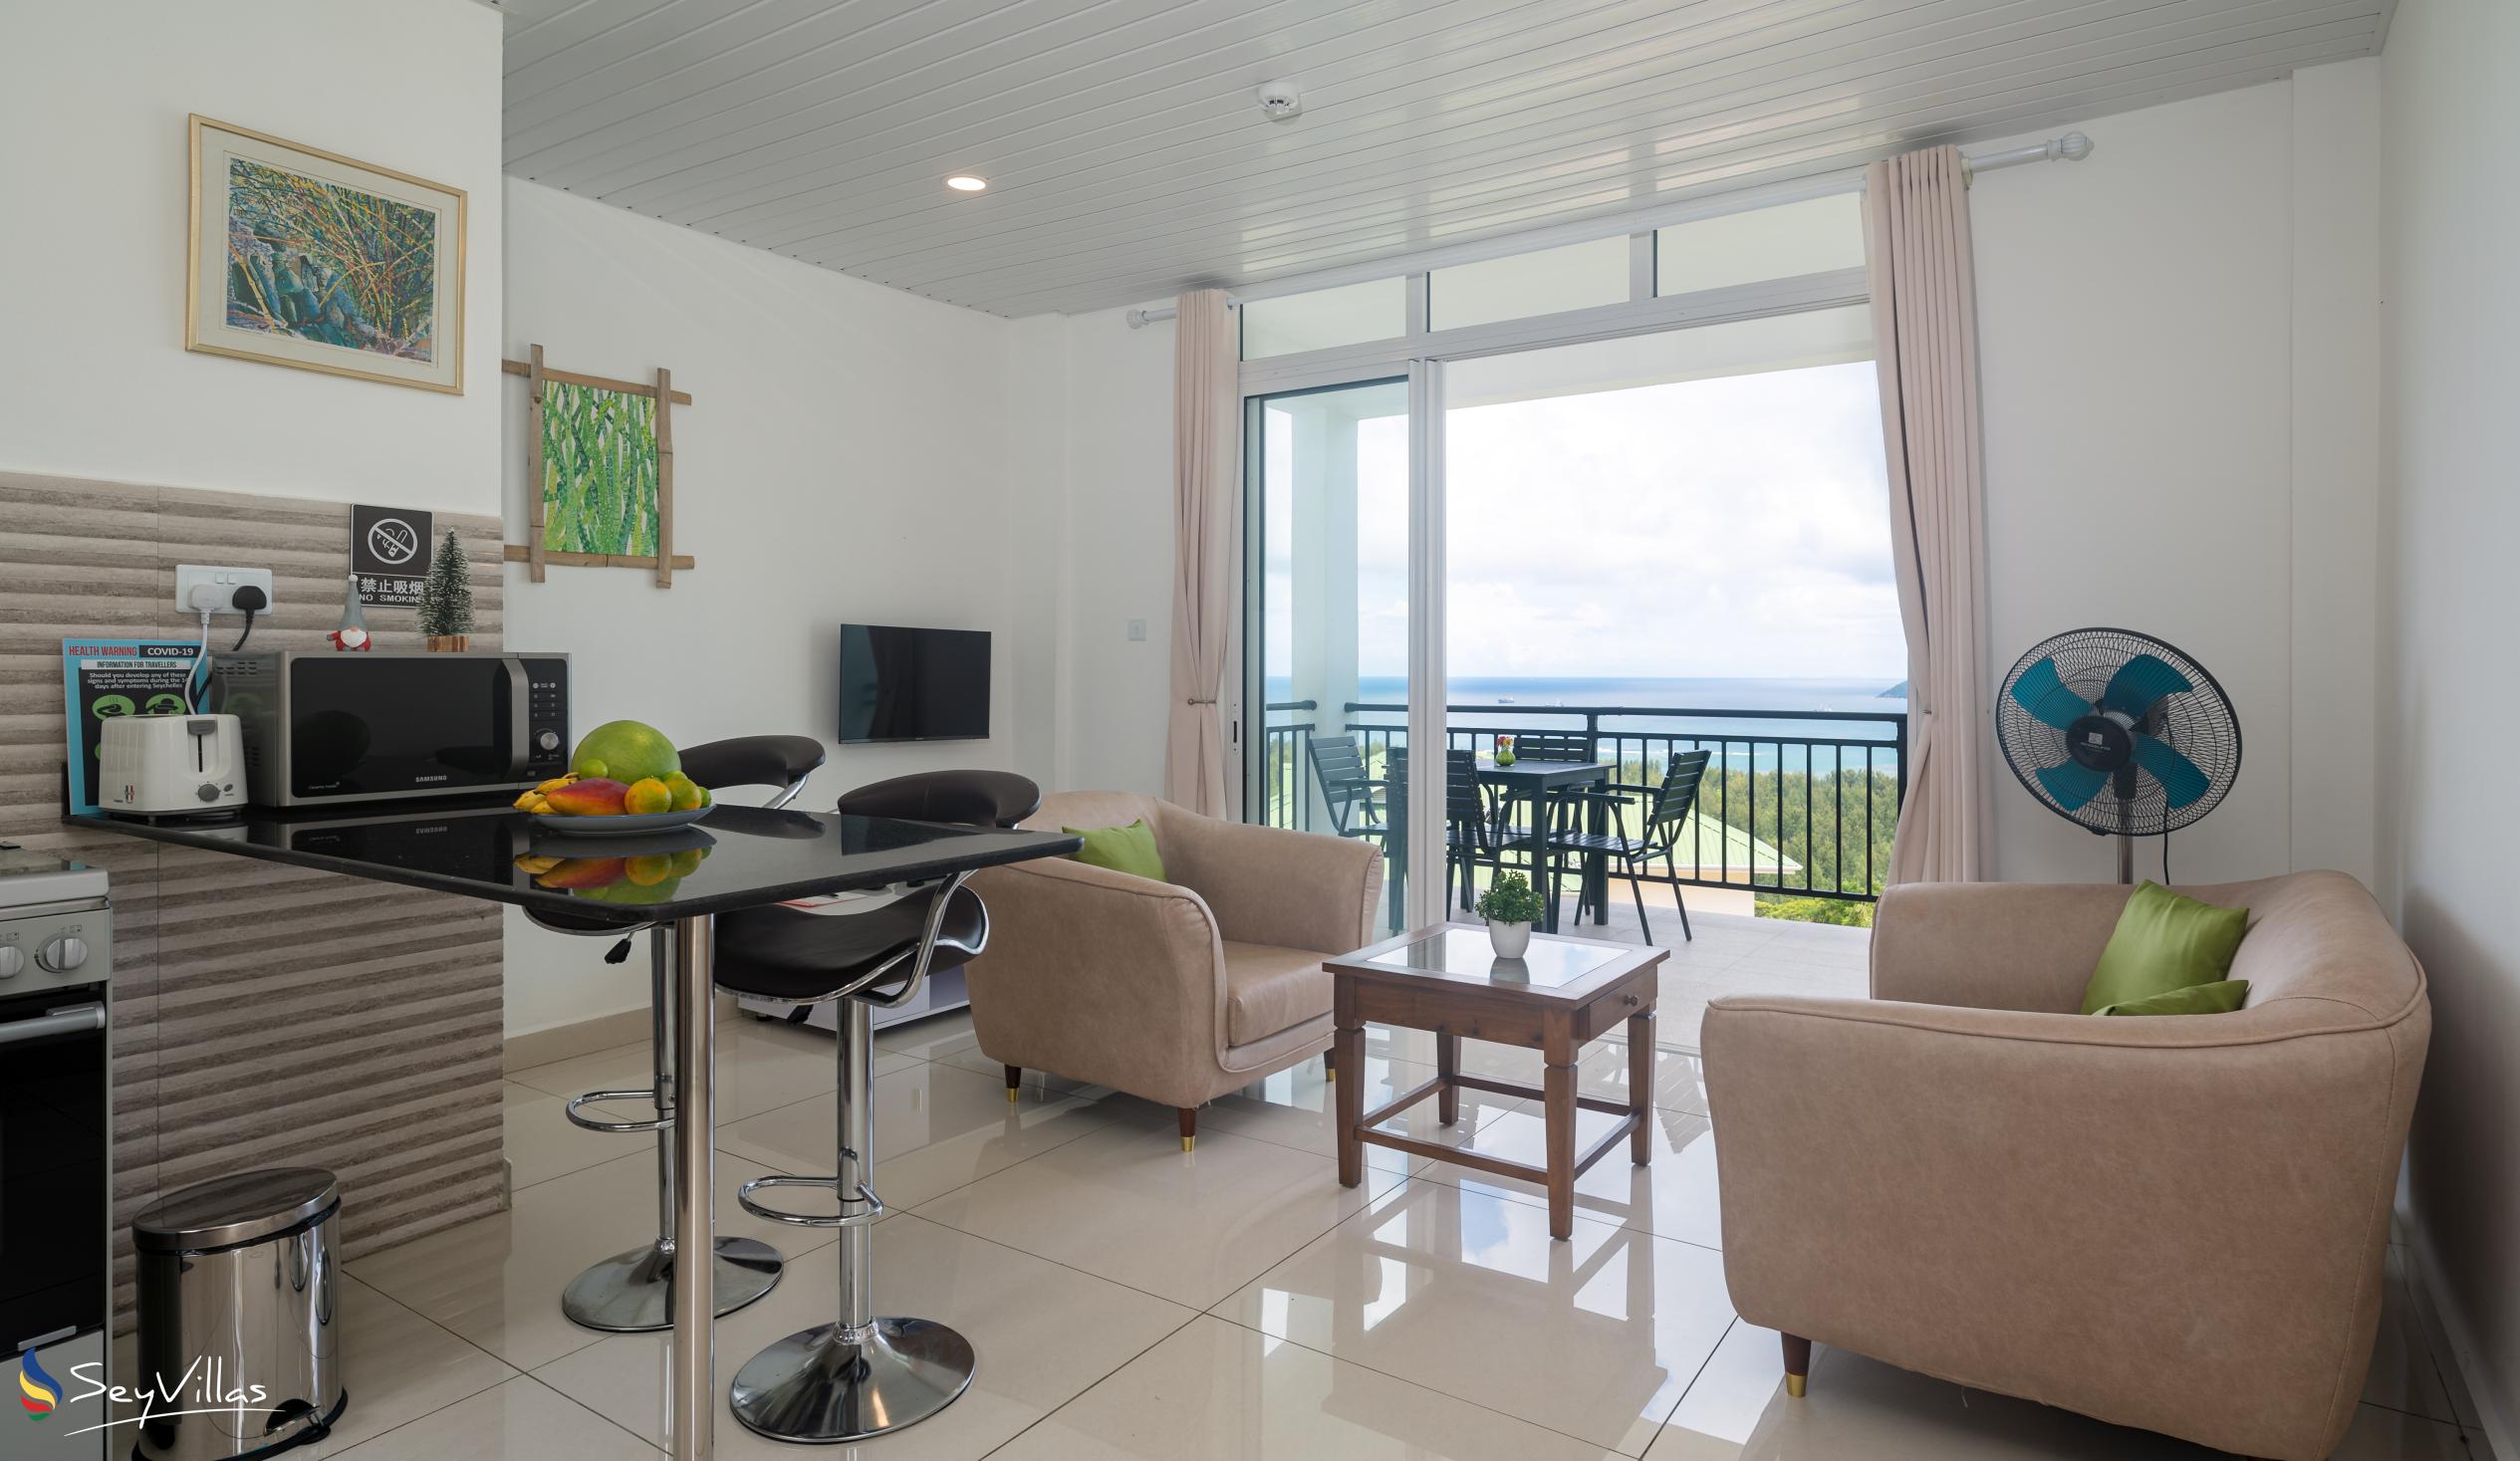 Foto 52: Creole Pearl Self Catering - Appartement 1 chambre - Mahé (Seychelles)